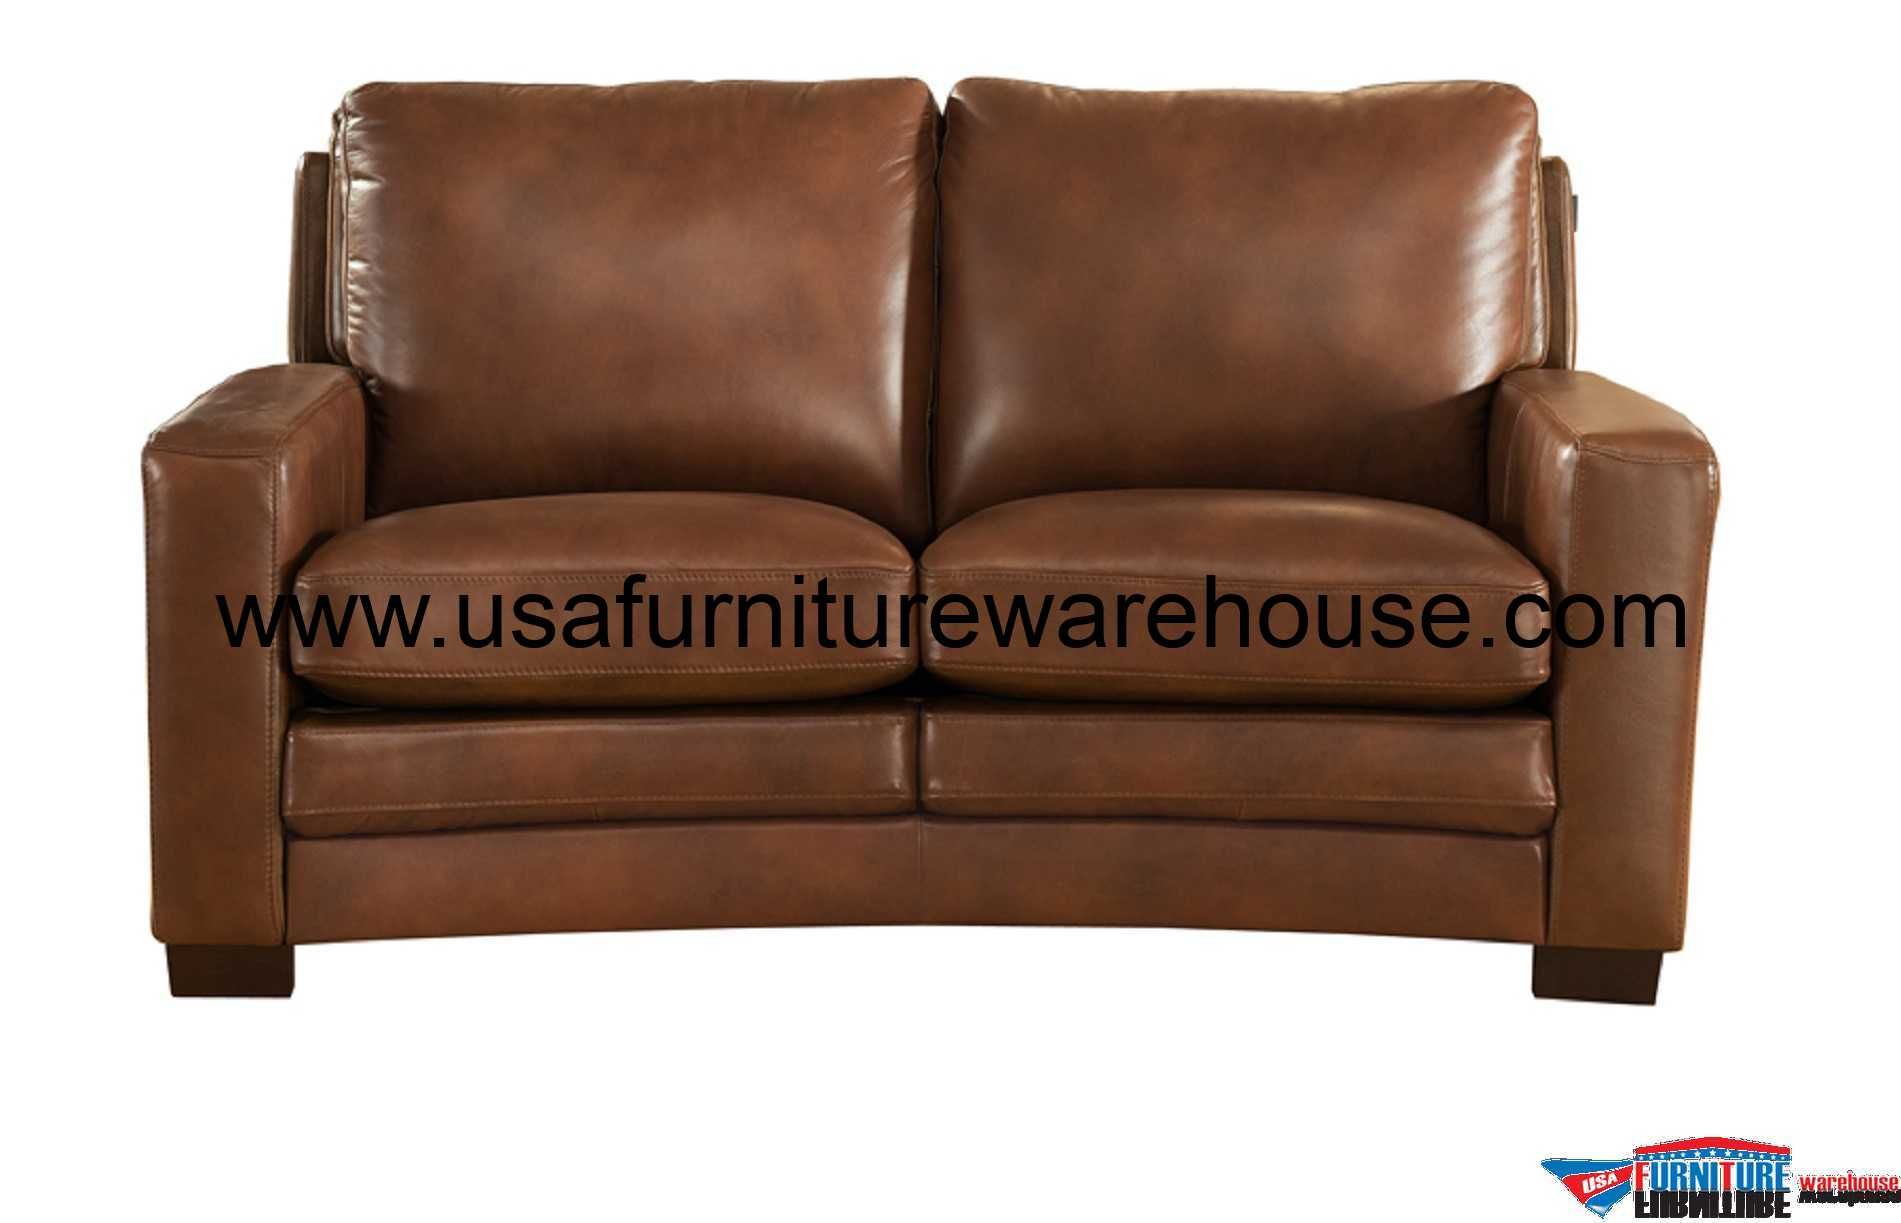 Joanna Full Top Grain Brown Leather Loveseat – Usa Furniture Warehouse With Regard To Top Grain Leather Loveseats (Gallery 4 of 20)